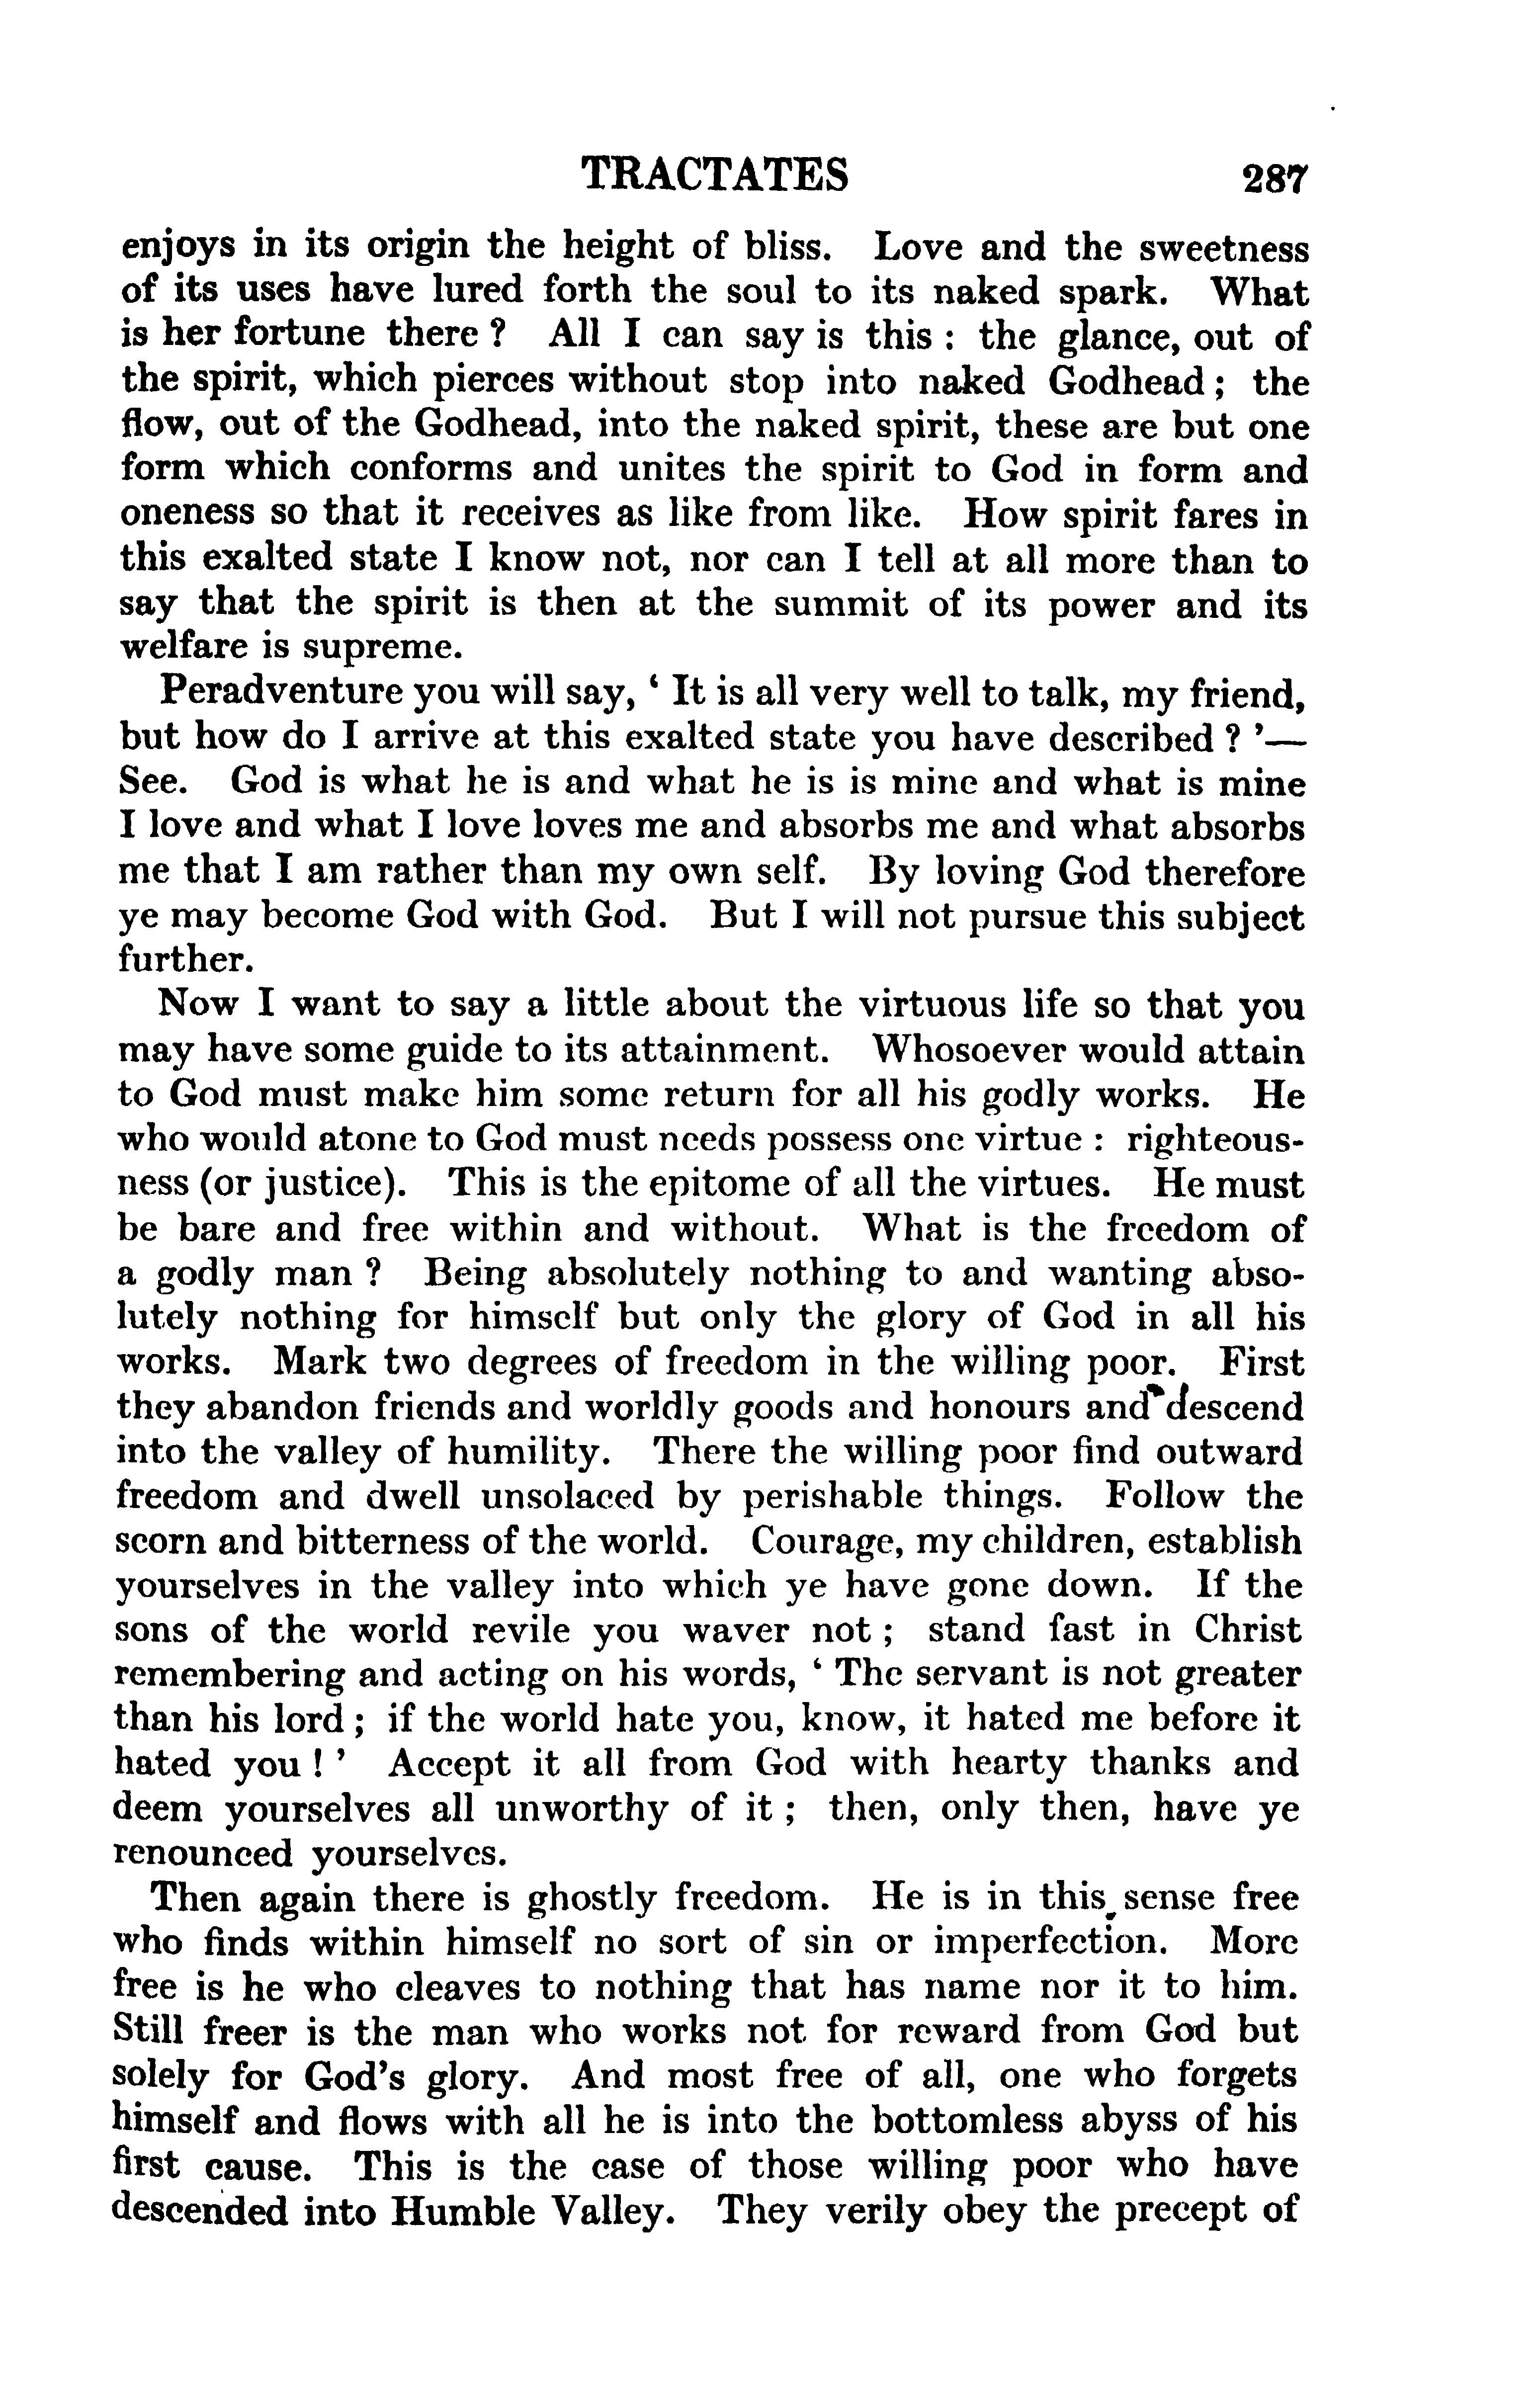 Image of page 0311